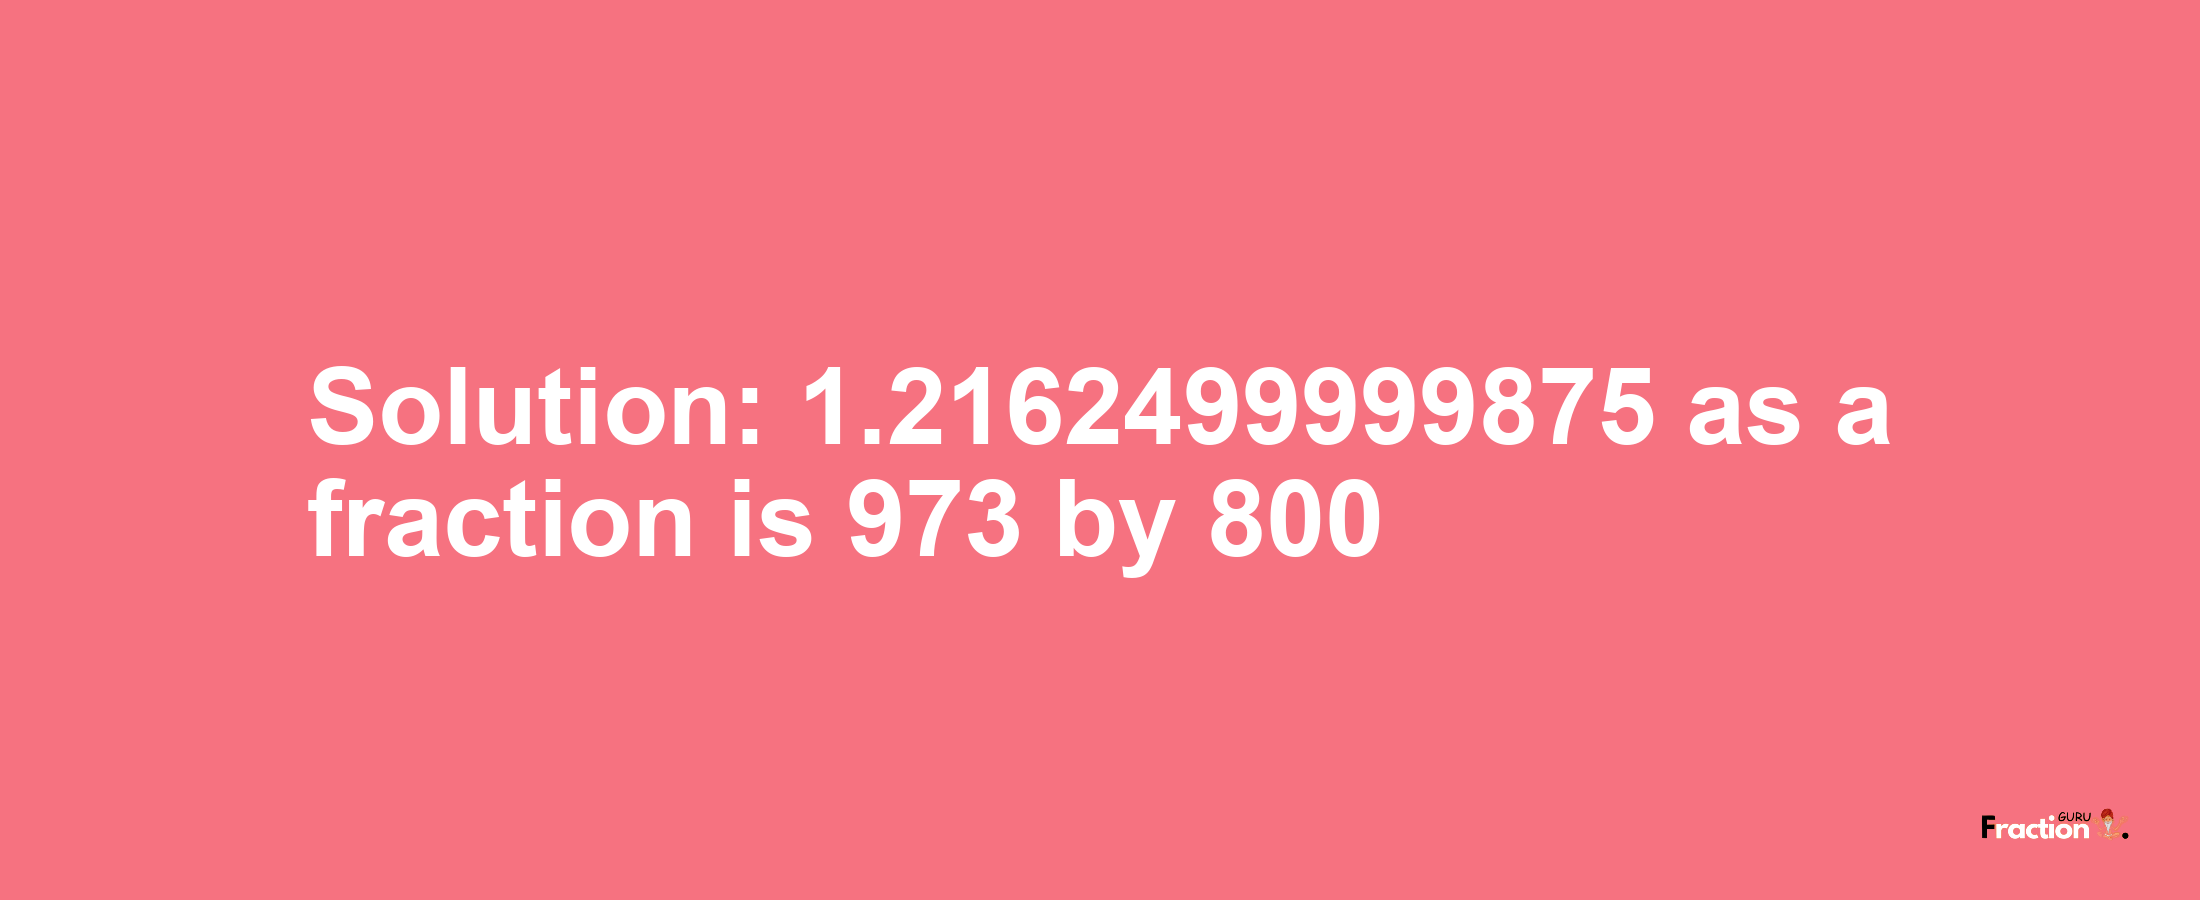 Solution:1.2162499999875 as a fraction is 973/800